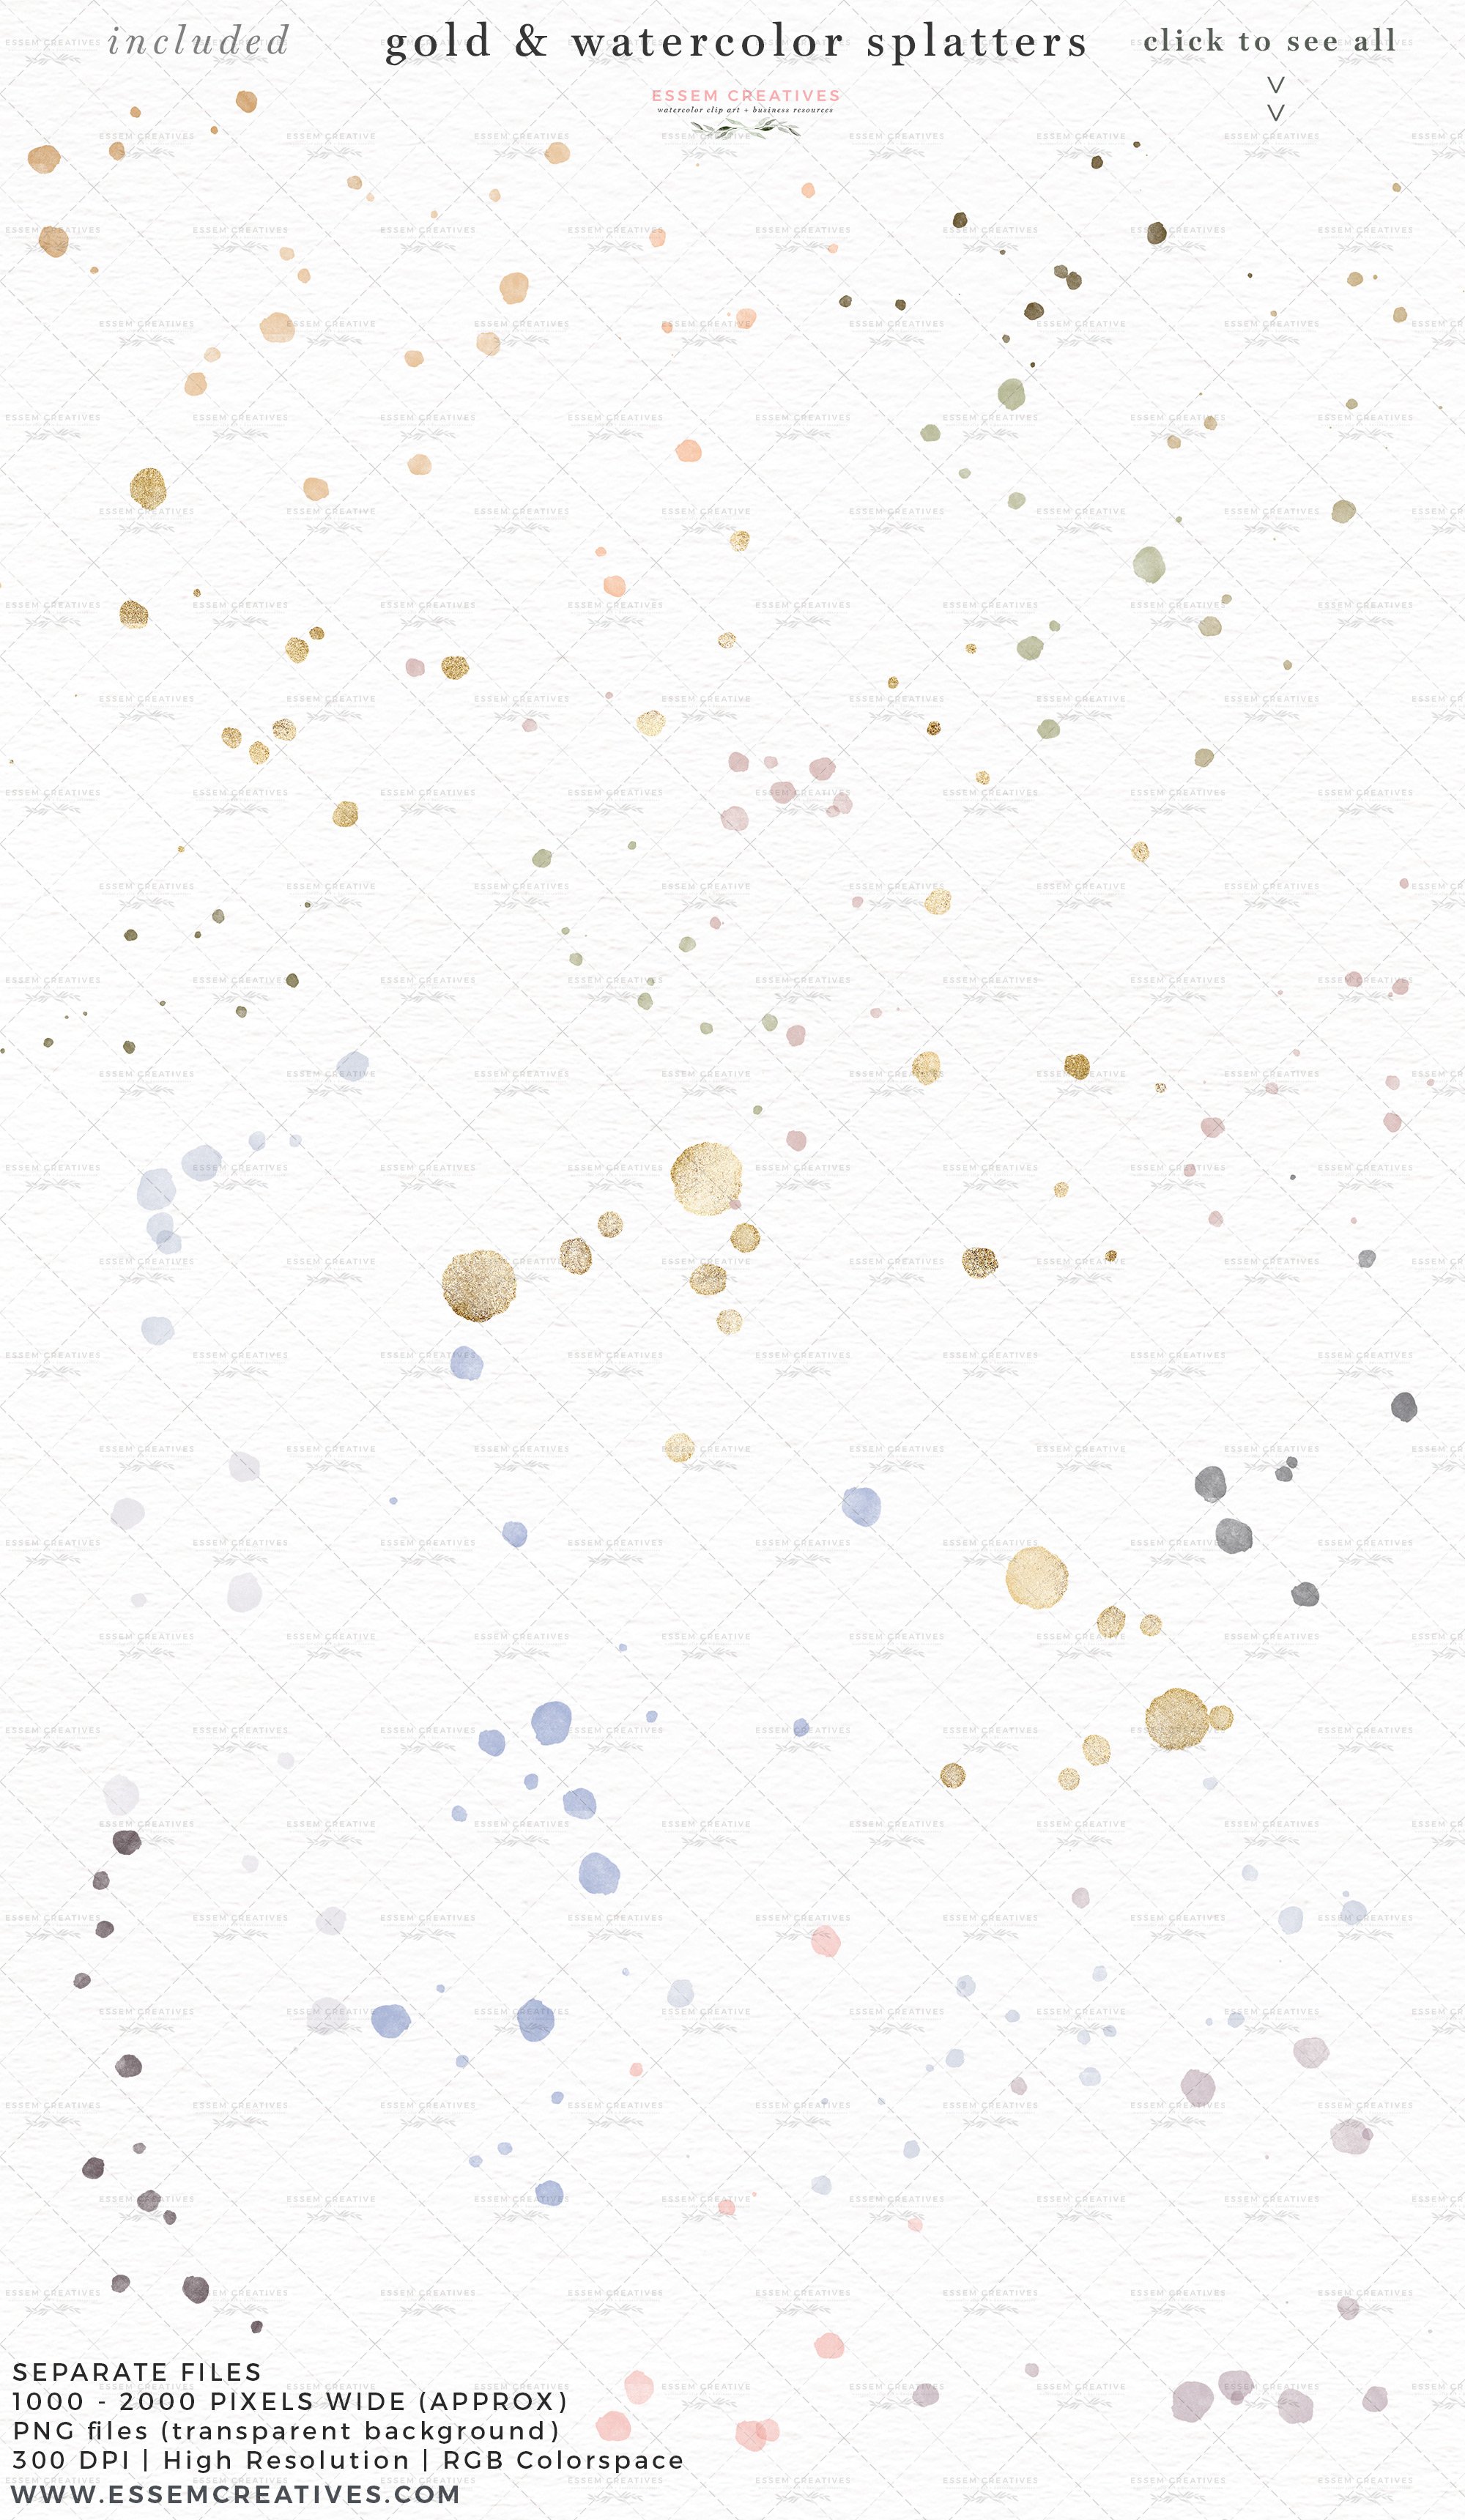 Gold Watercolor Paint Splatters PNG preview image.